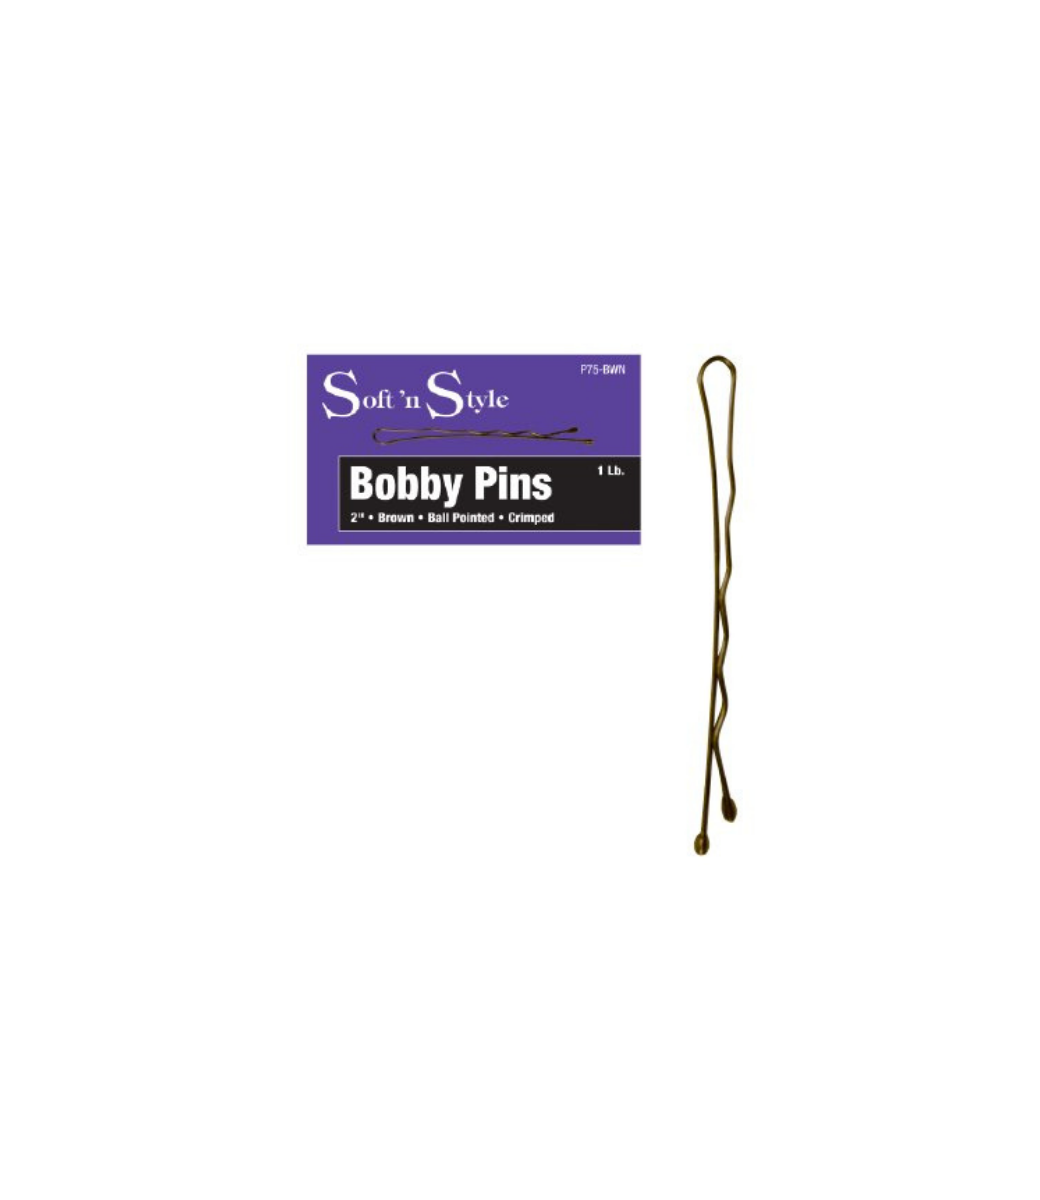 SOFT N STYLE BURMAX - SOFT'N STYLE - Bobby Pins Ball Pointed  - Crimped - 2" - 1Lb - Brown - P75-BWN